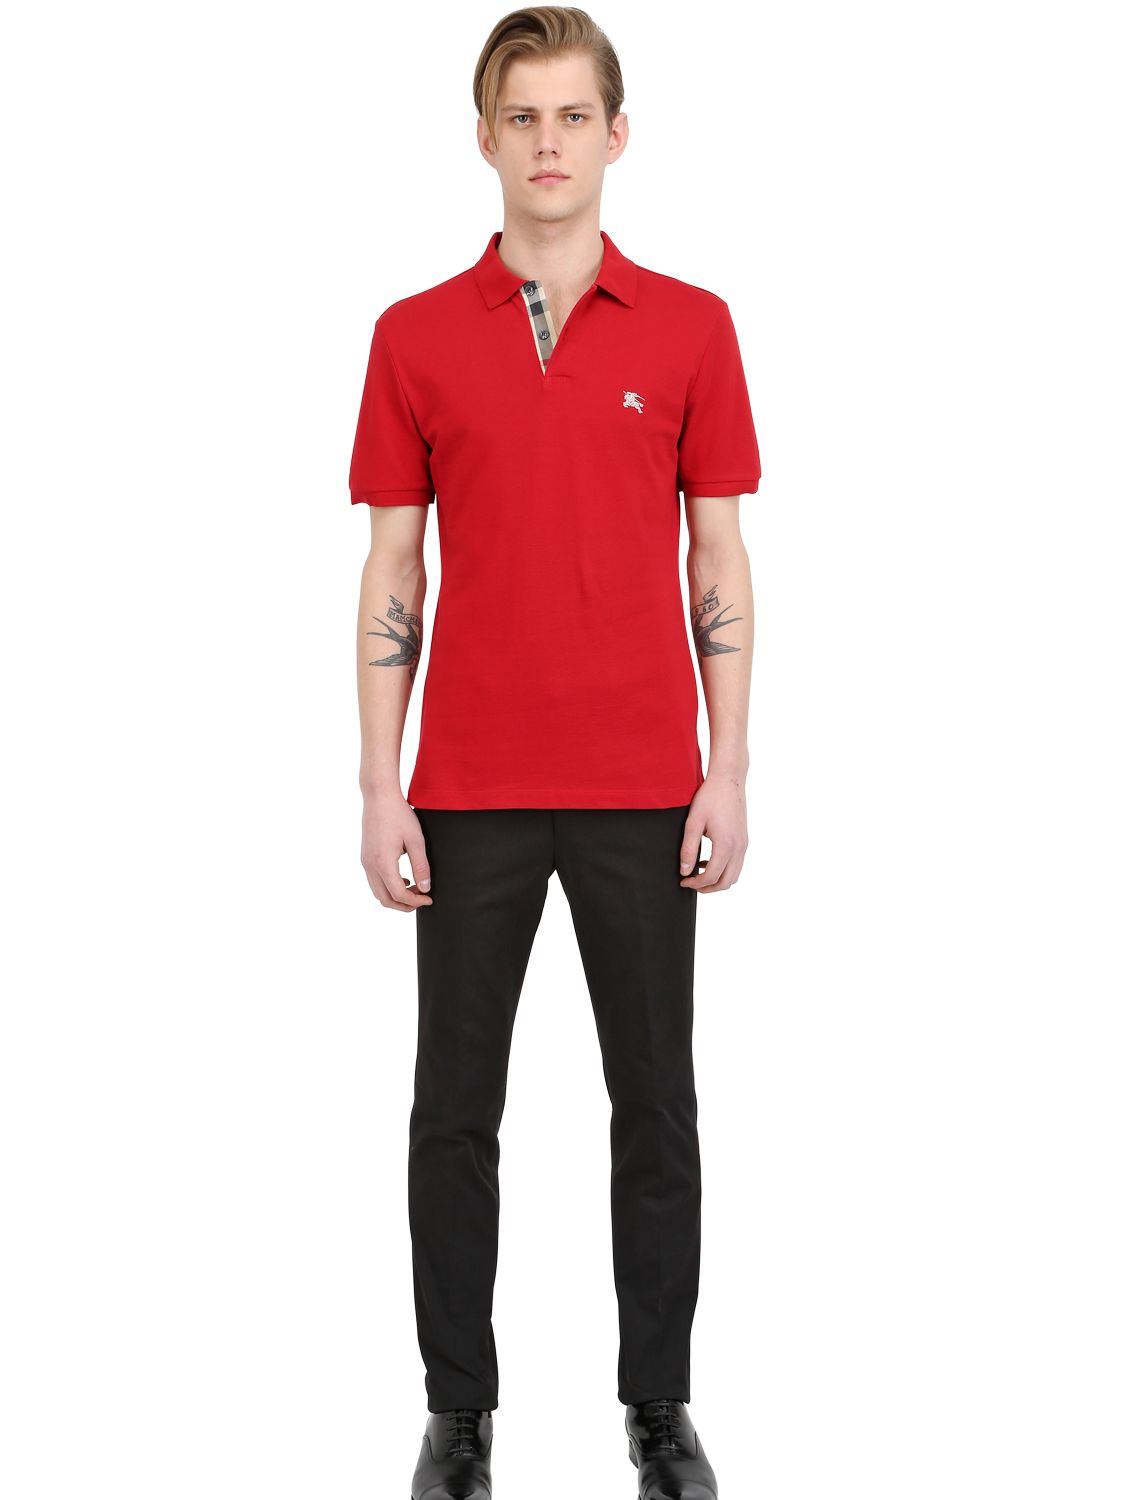 Brit Cotton Pique Polo in Red for Men - Lyst